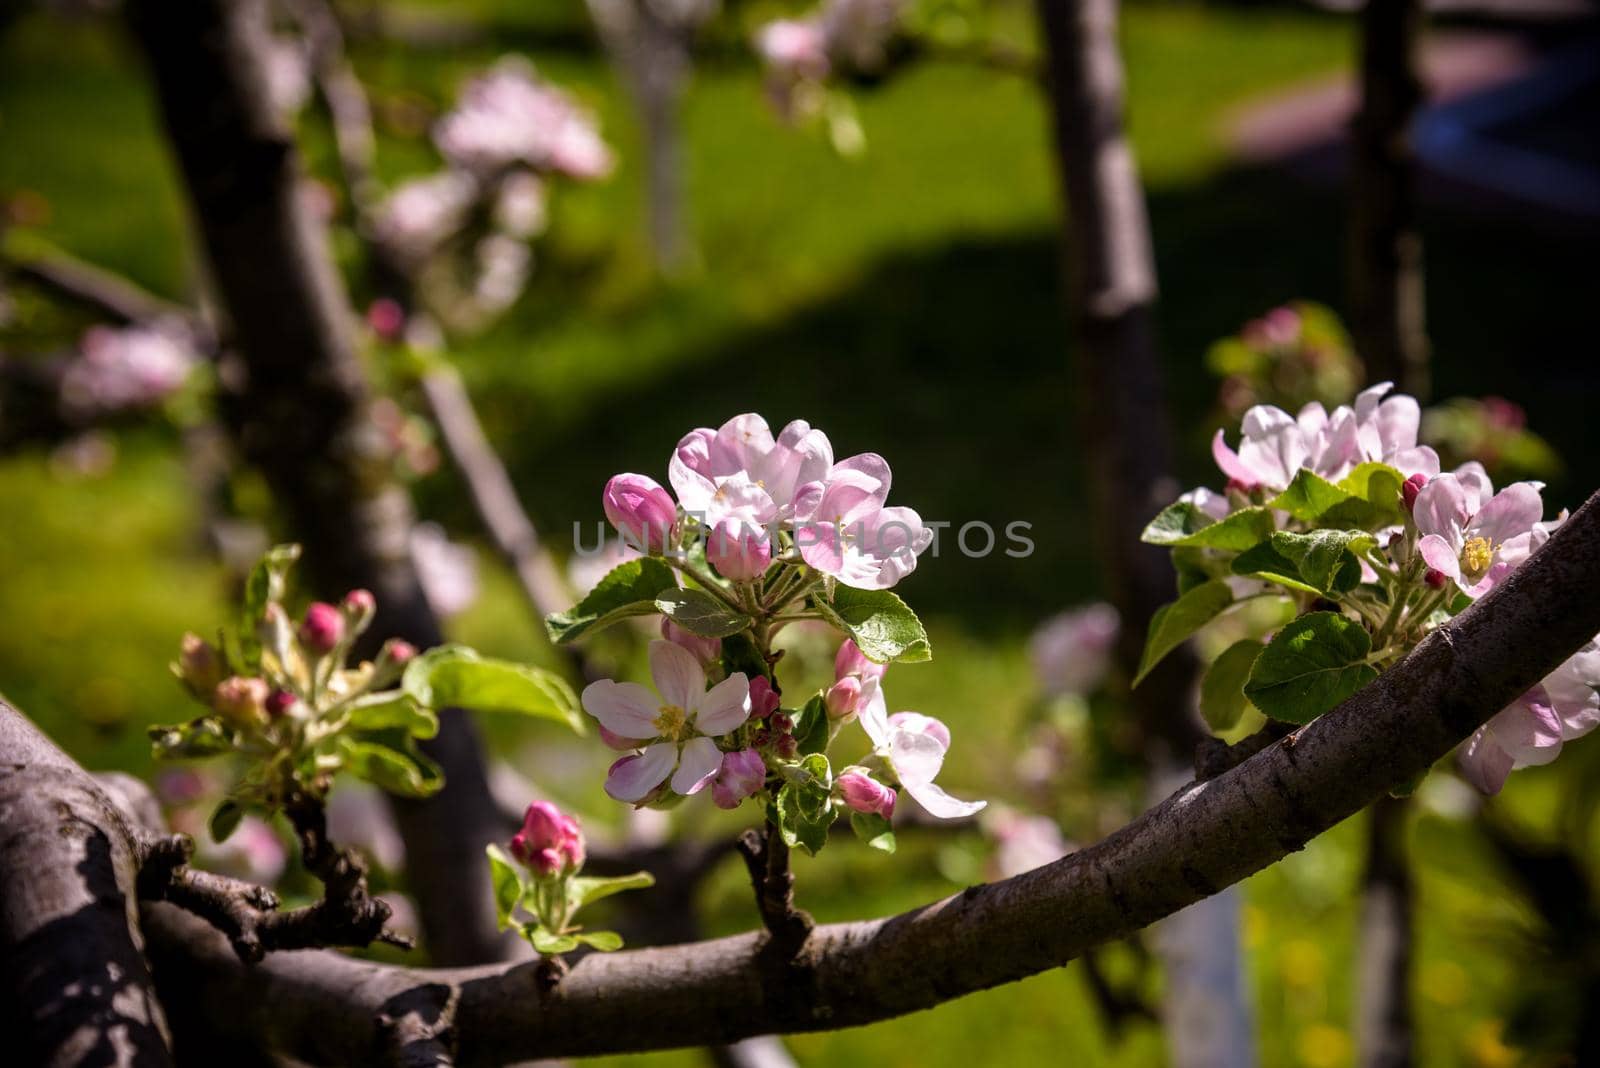 Closeup blossoming tree brunch with white flowers. Flowering of apple trees. Beautiful blooming apple tree branch. Close up of apple flowers.